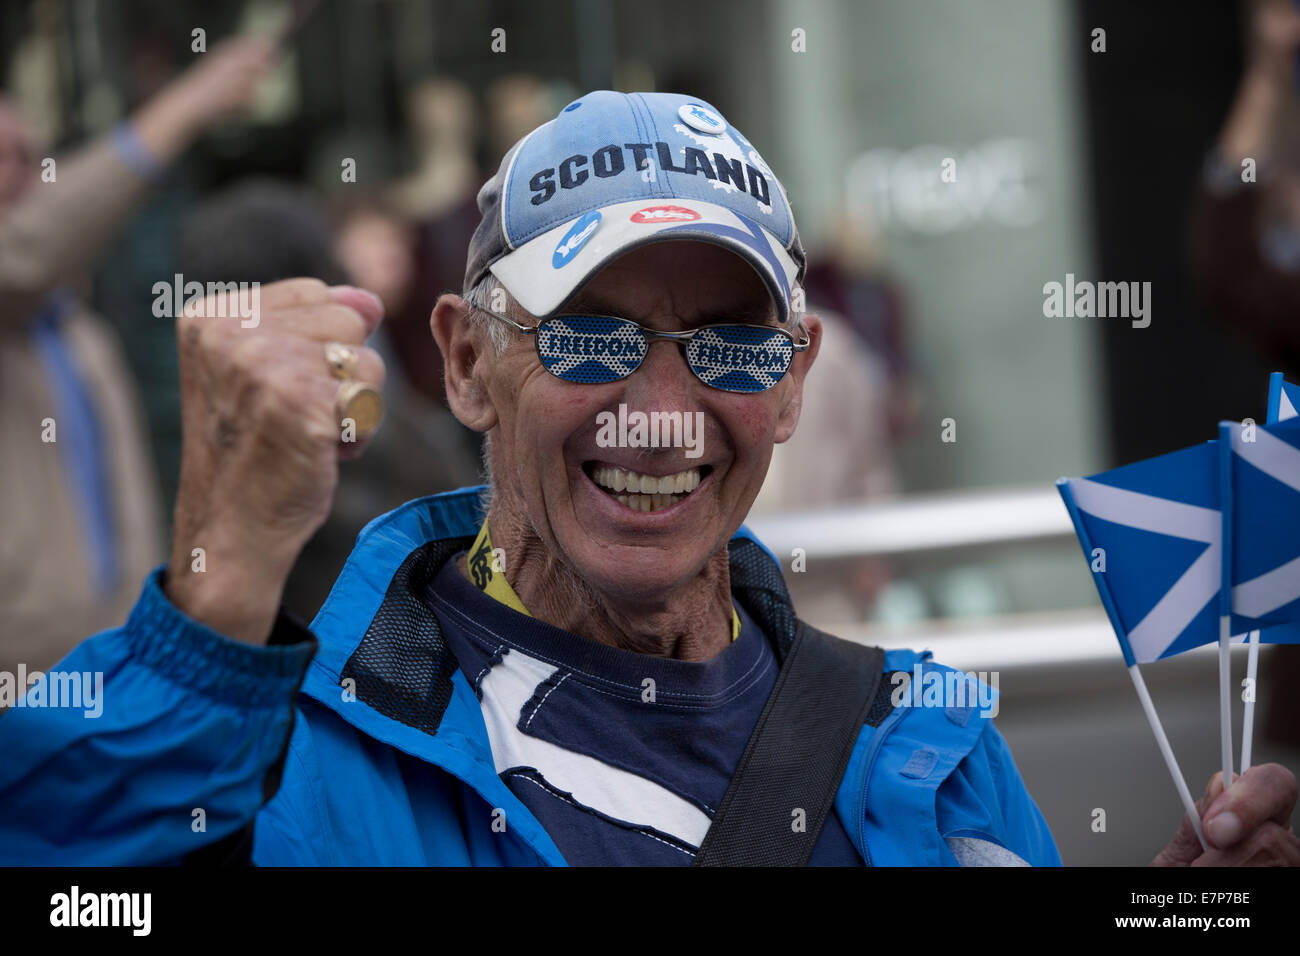 A pro-independence Yes Scotland supporter is pictured during an event in Perth. Stock Photo